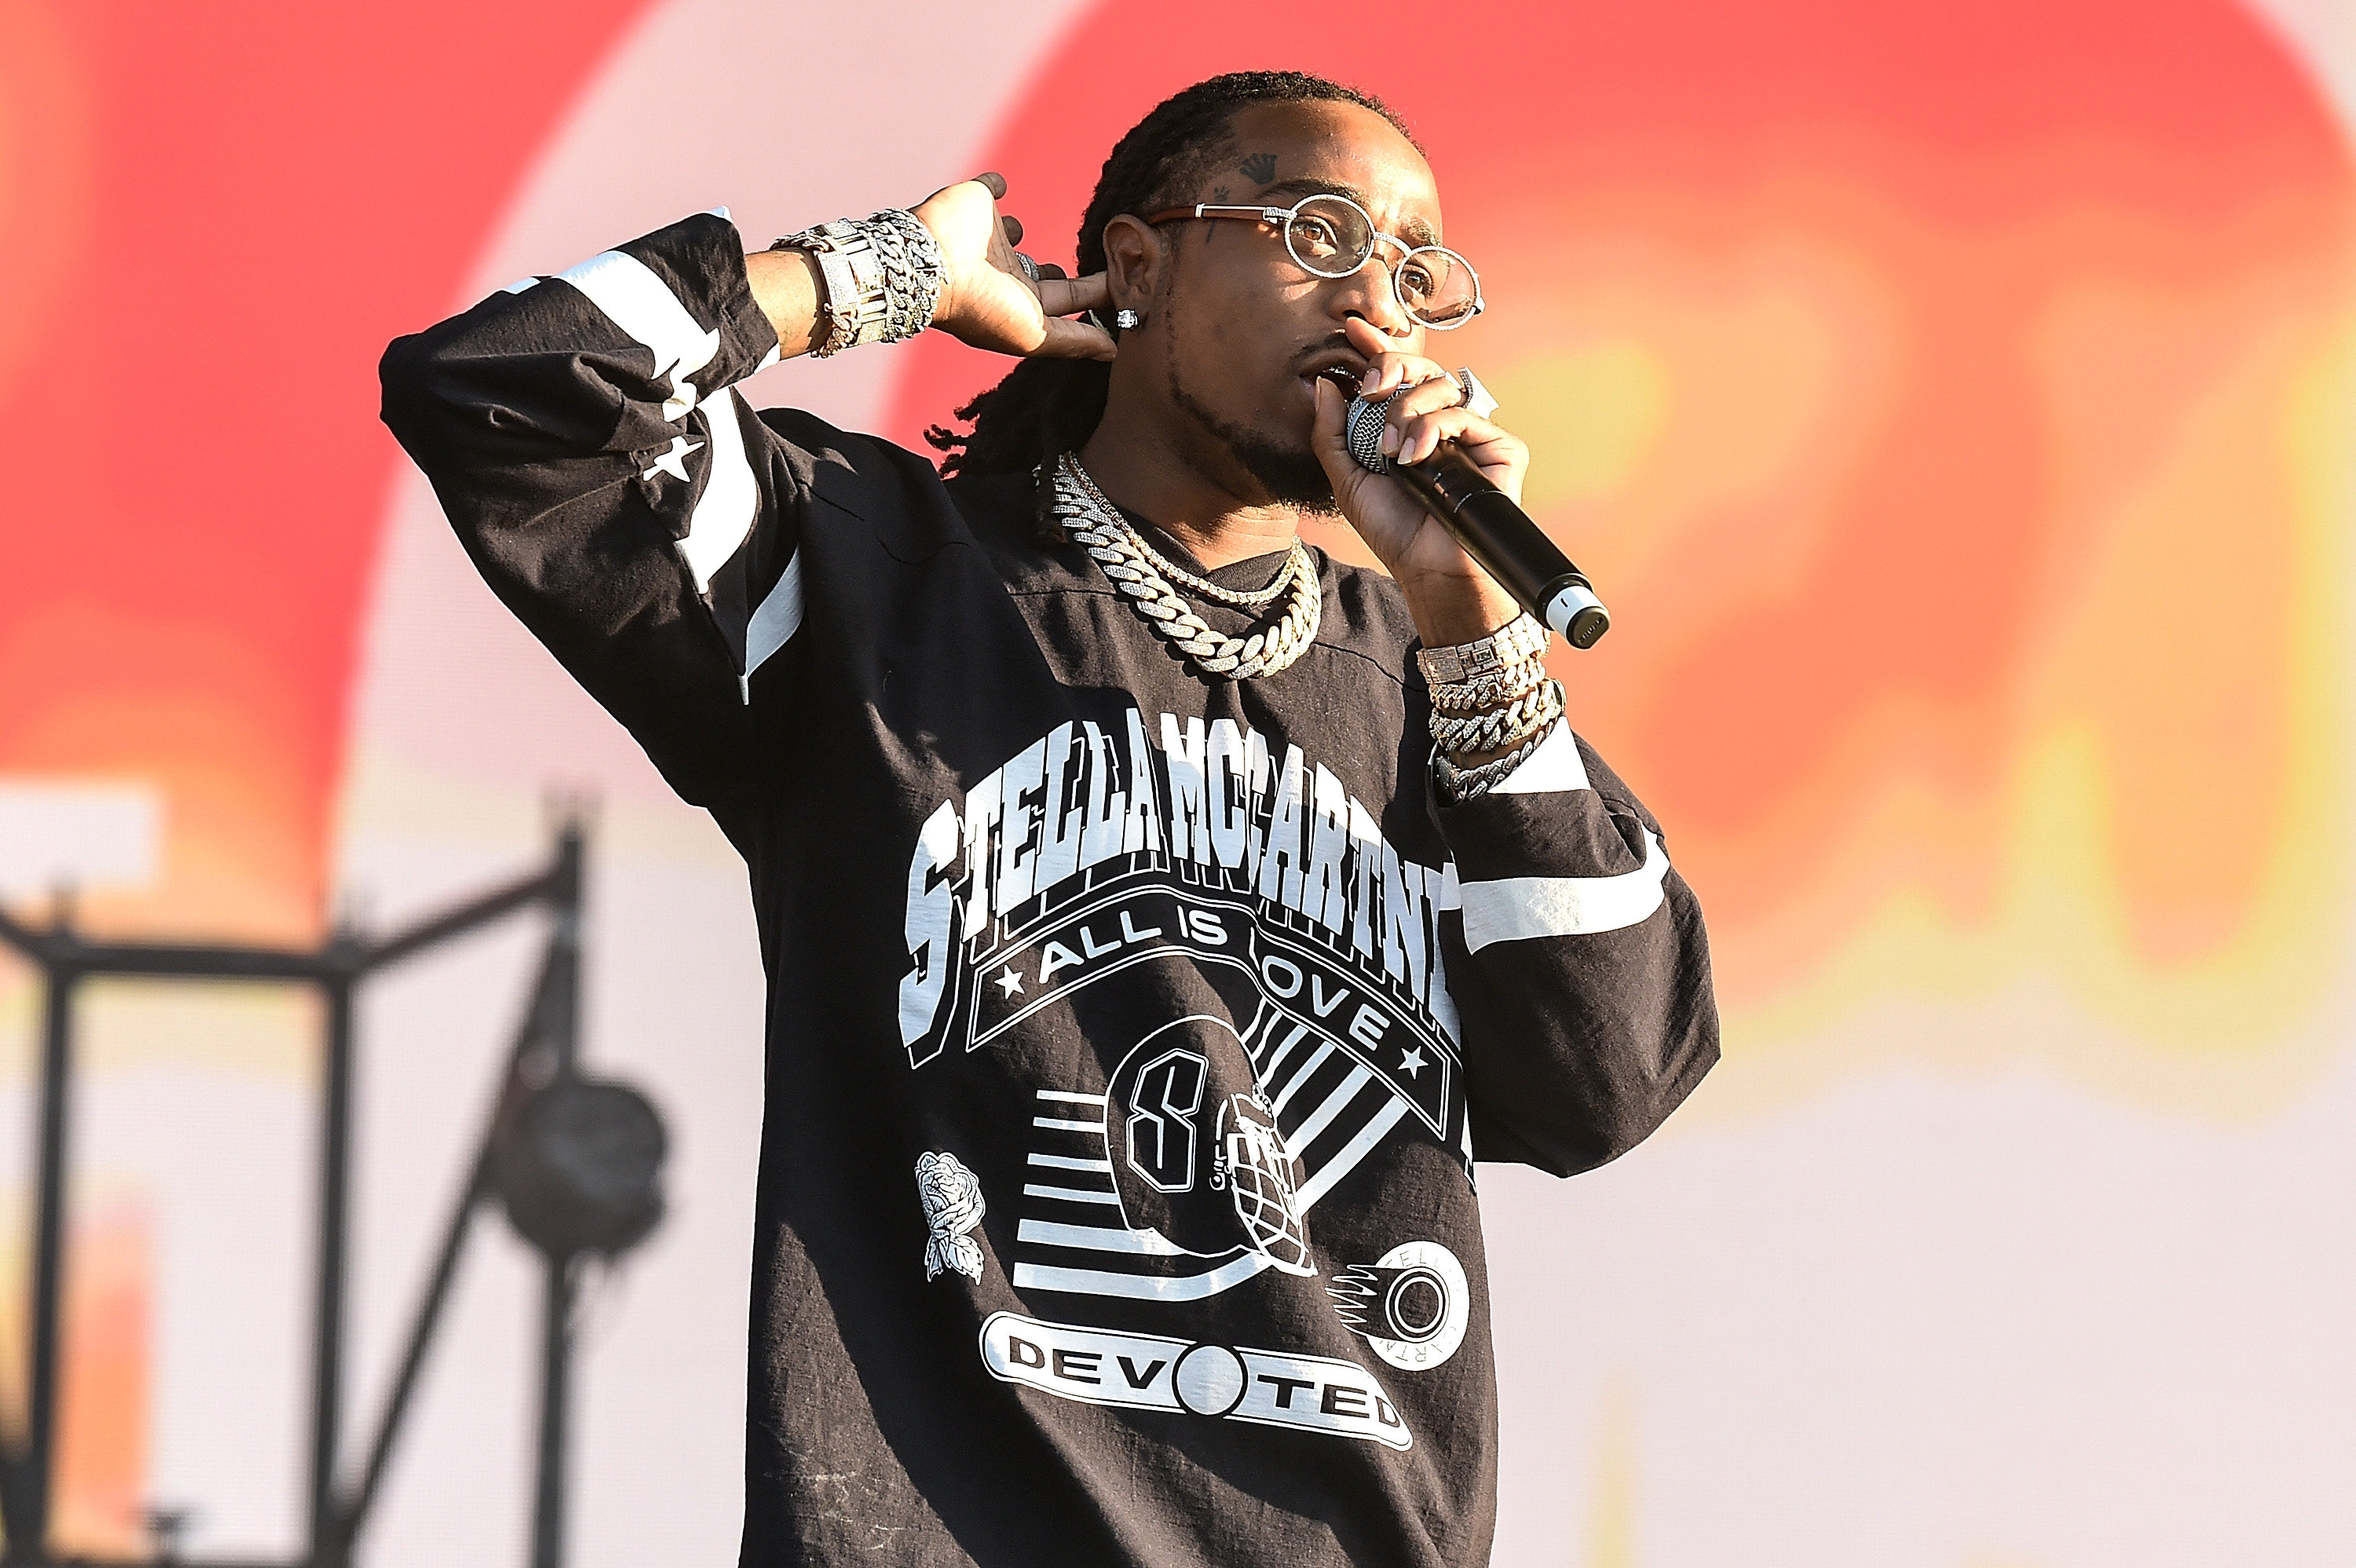 Quavo Gets In His Bag & Partners With Martell Cognac